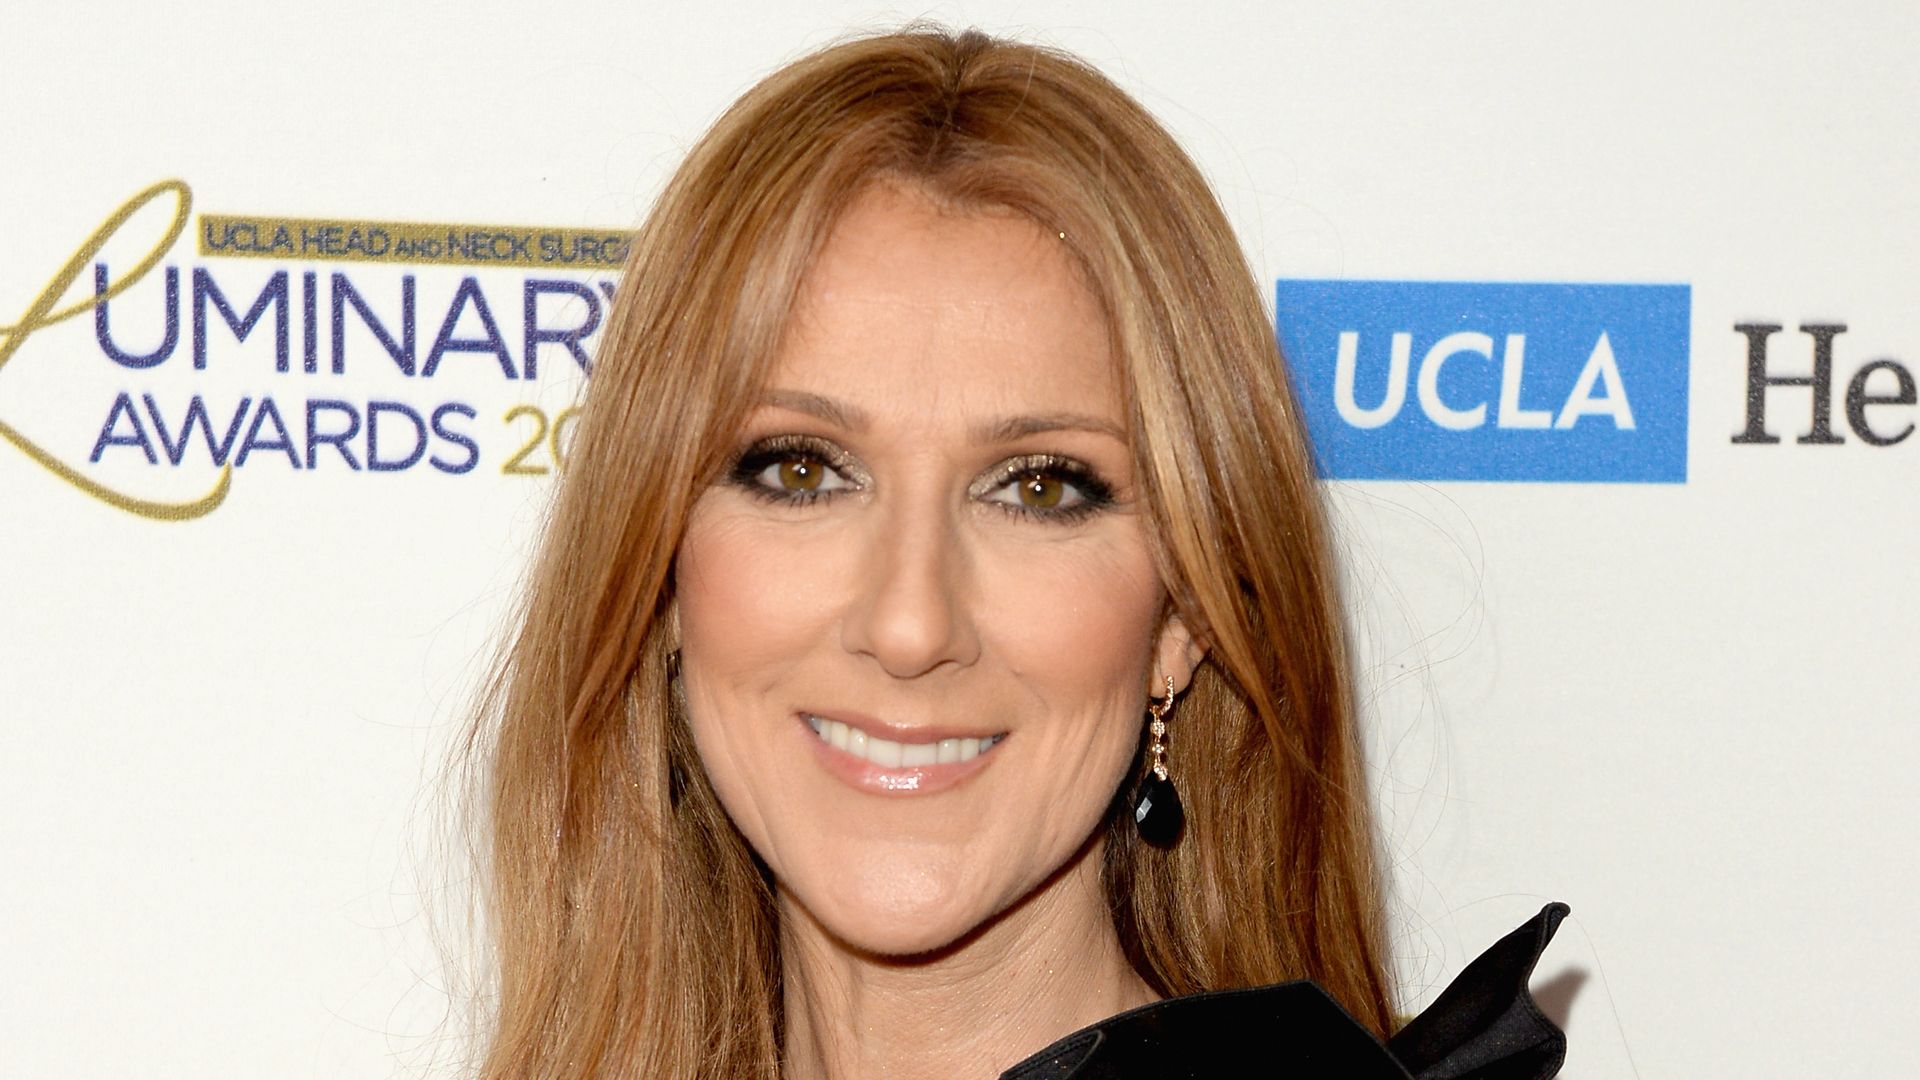 Celine Dion attends the UCLA Head and Neck Surgery Luminary Awards